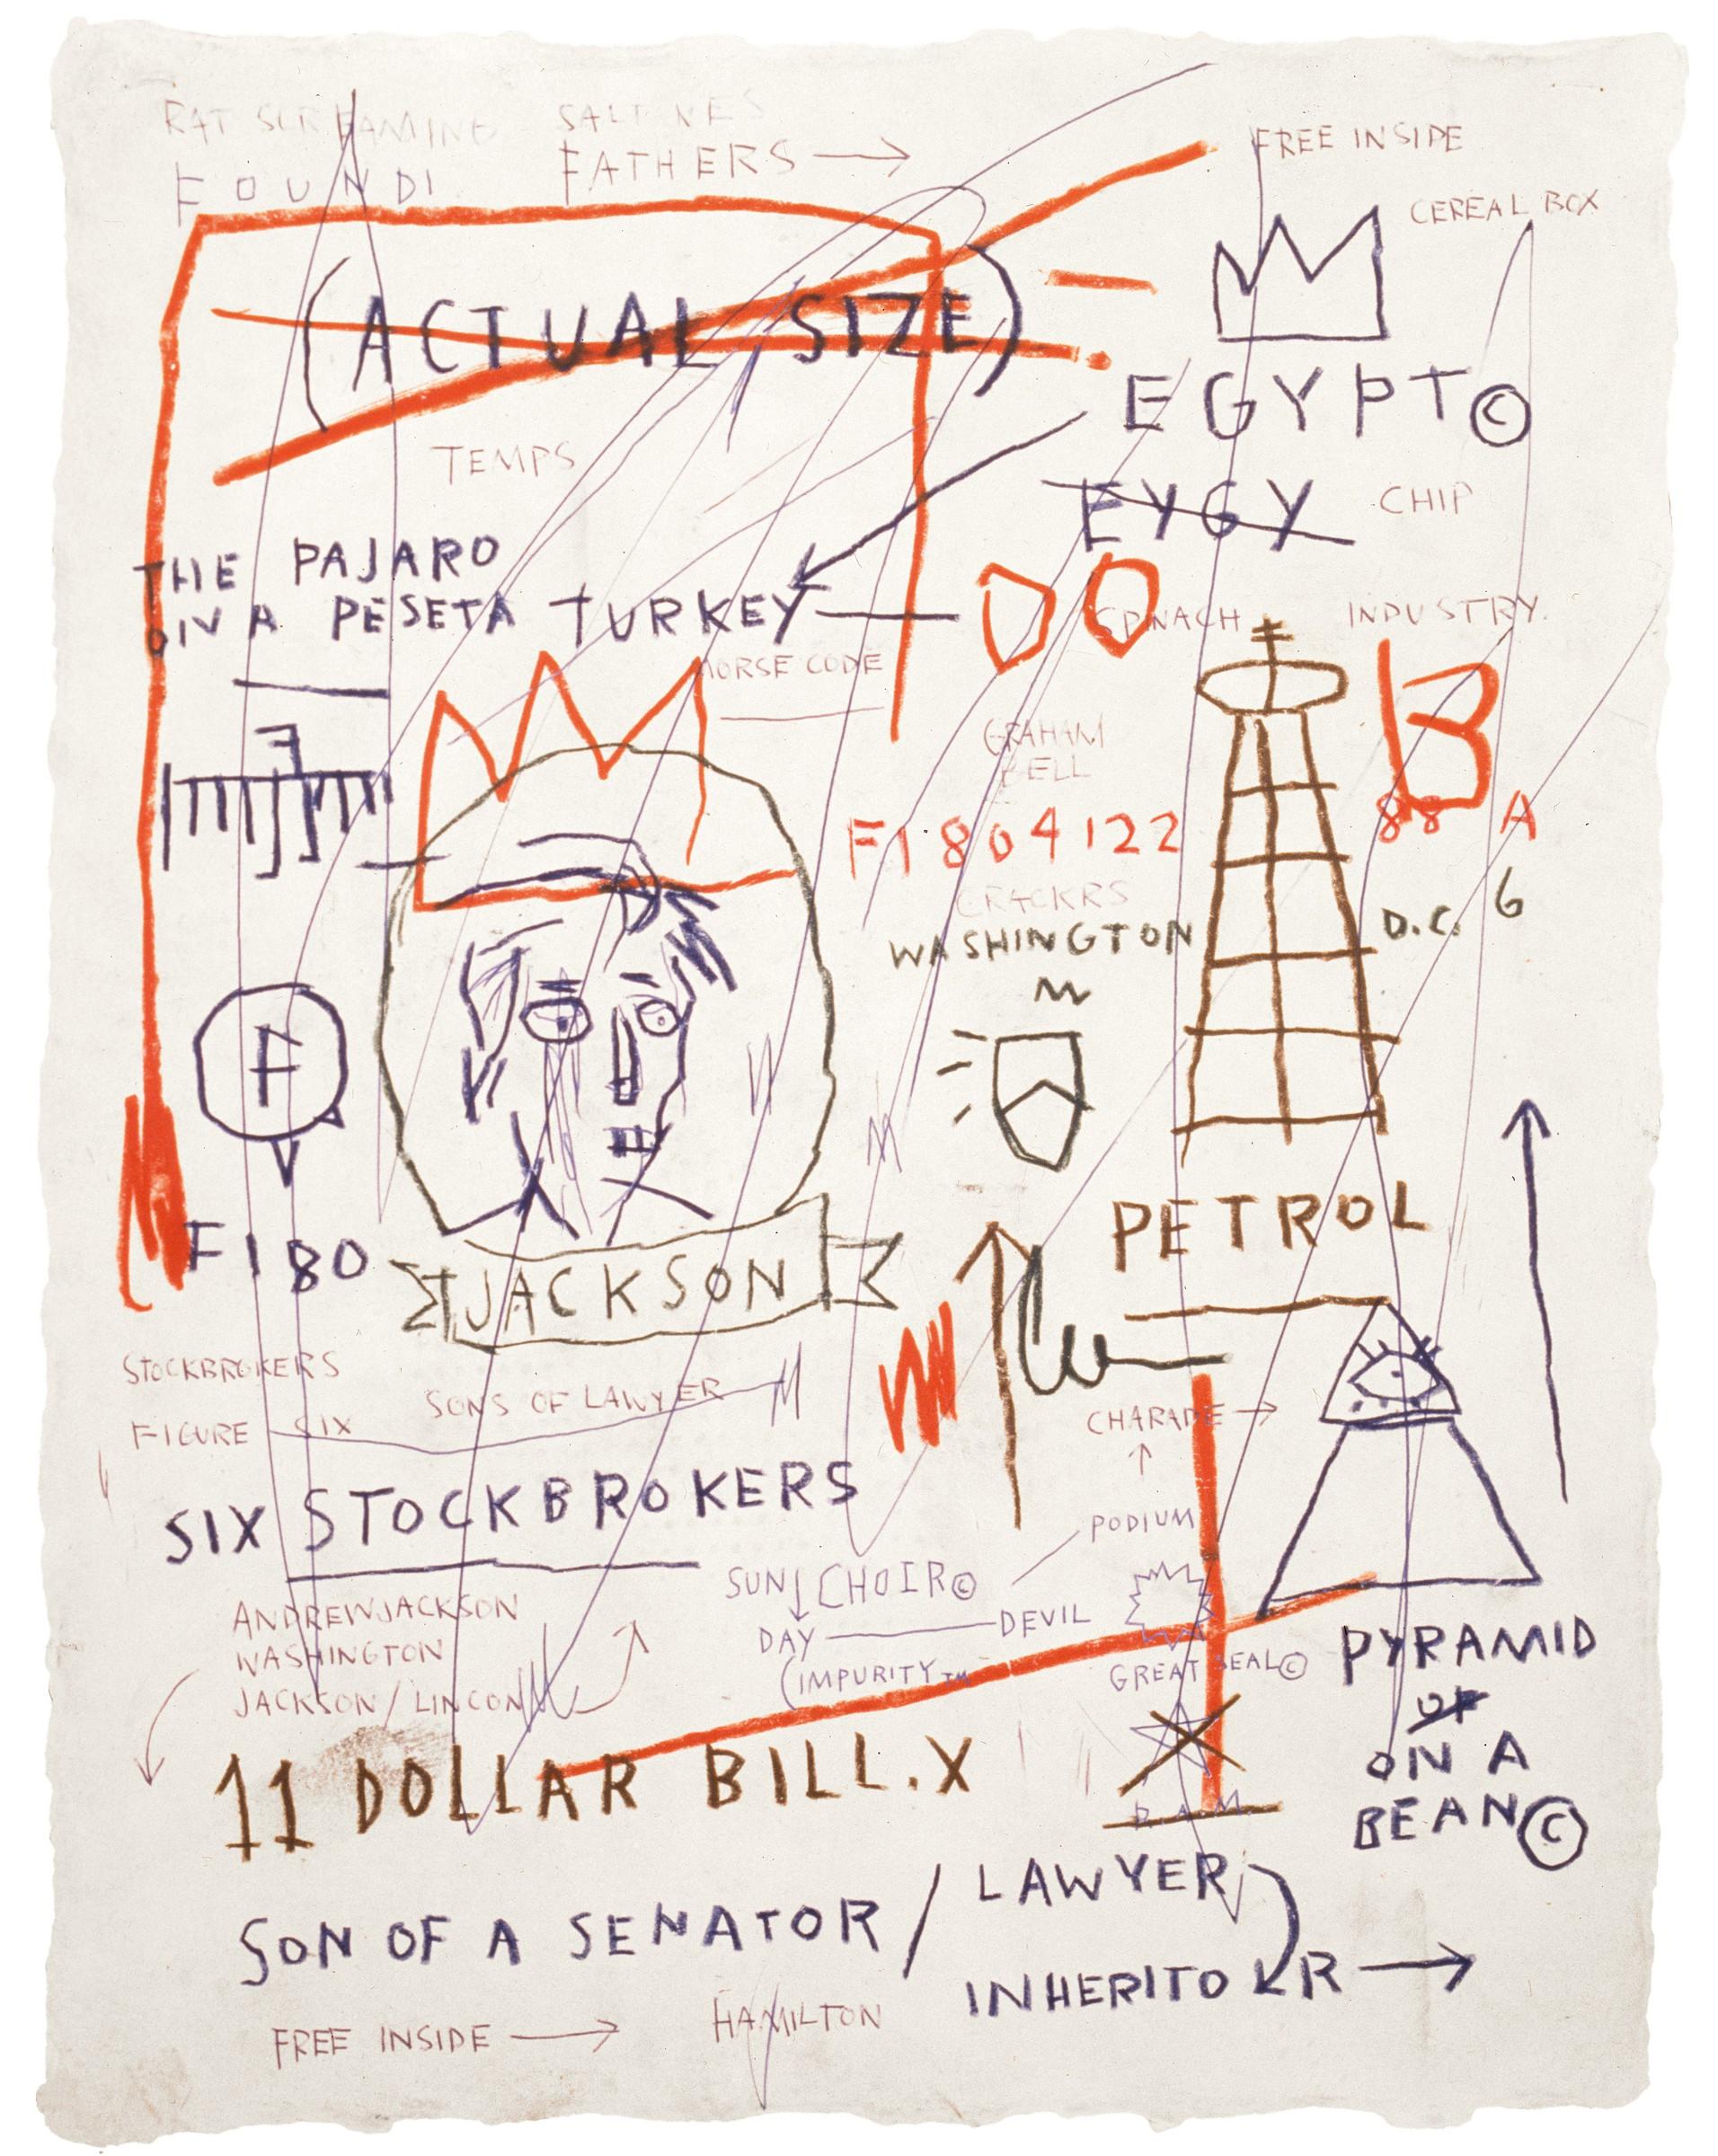 After Jean-Michel Basquiat - Lithography - Untitled (Jackson), 1982 at  1stDibs | jean michel basquiat handwriting, jean michel basquiat writing